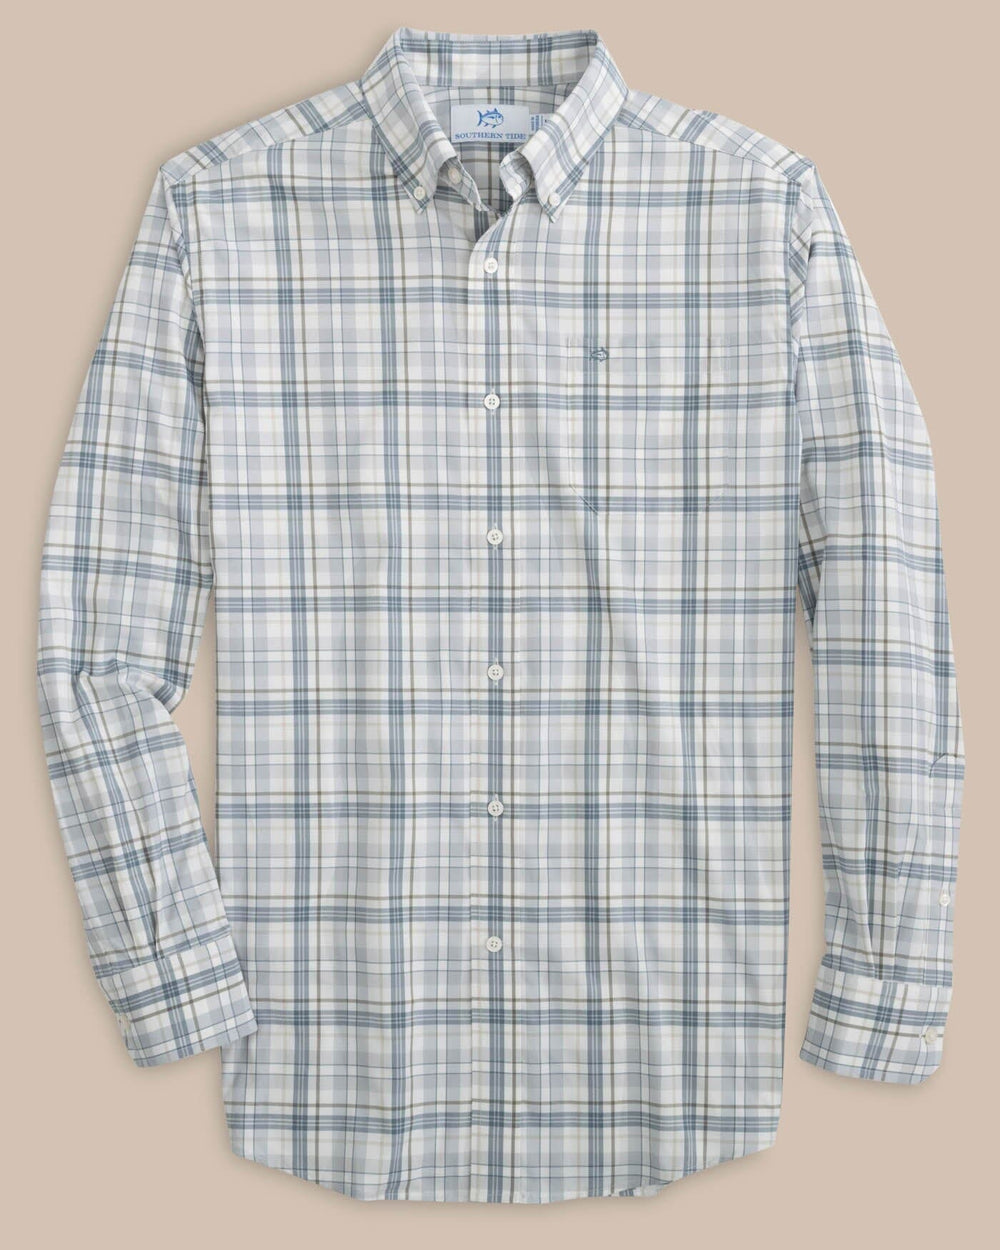 The front view of the Southern Tide Highsmith Plaid Sport Shirt by Southern Tide - Platinum Grey